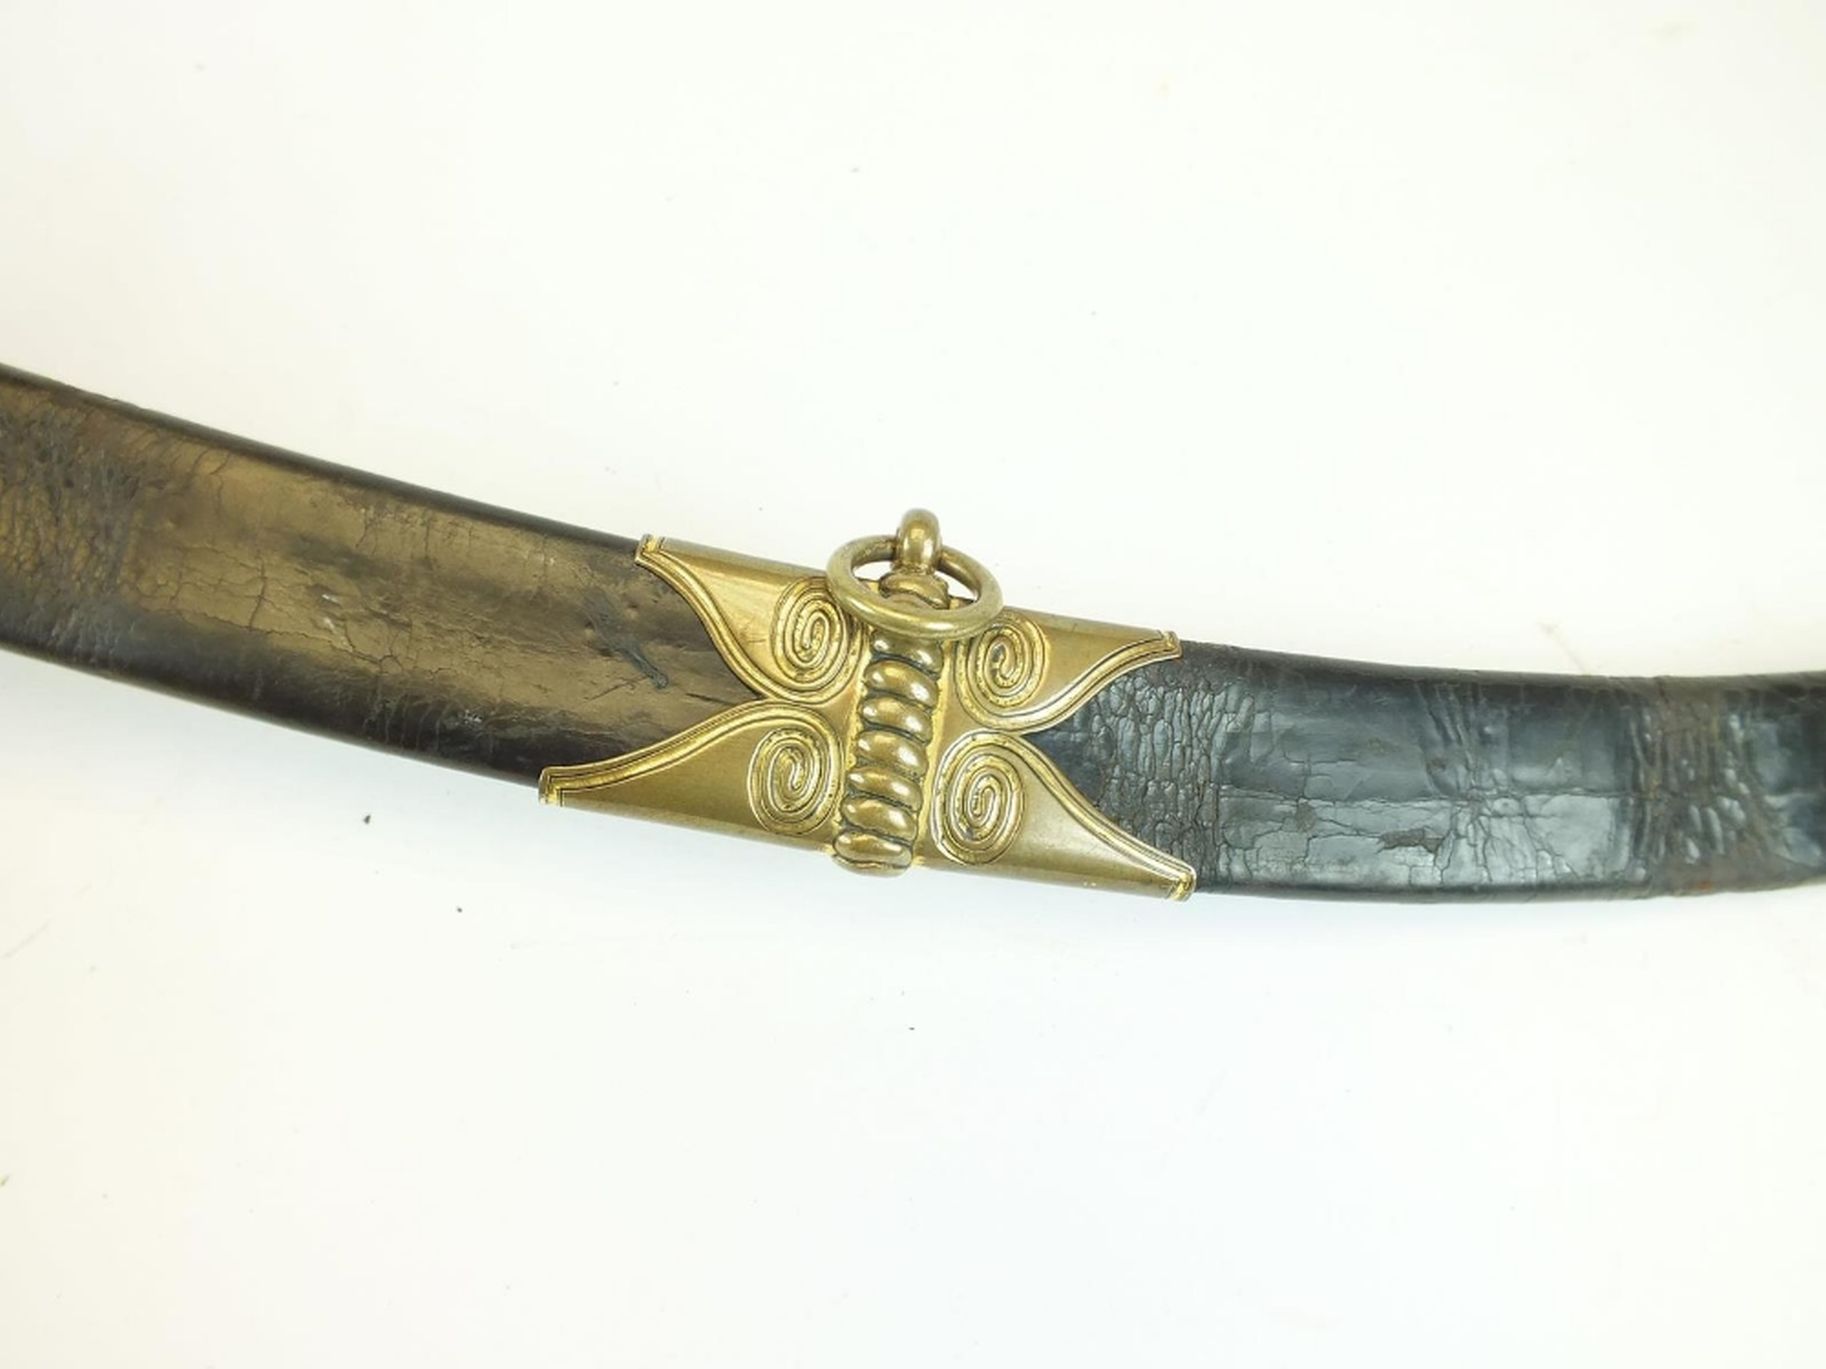 A LATE 18TH OR EARLY 19TH CENTURY PRESENTATION QUALITY SABRE BY PROSSER, 83cm sharply curved pipe- - Image 6 of 18